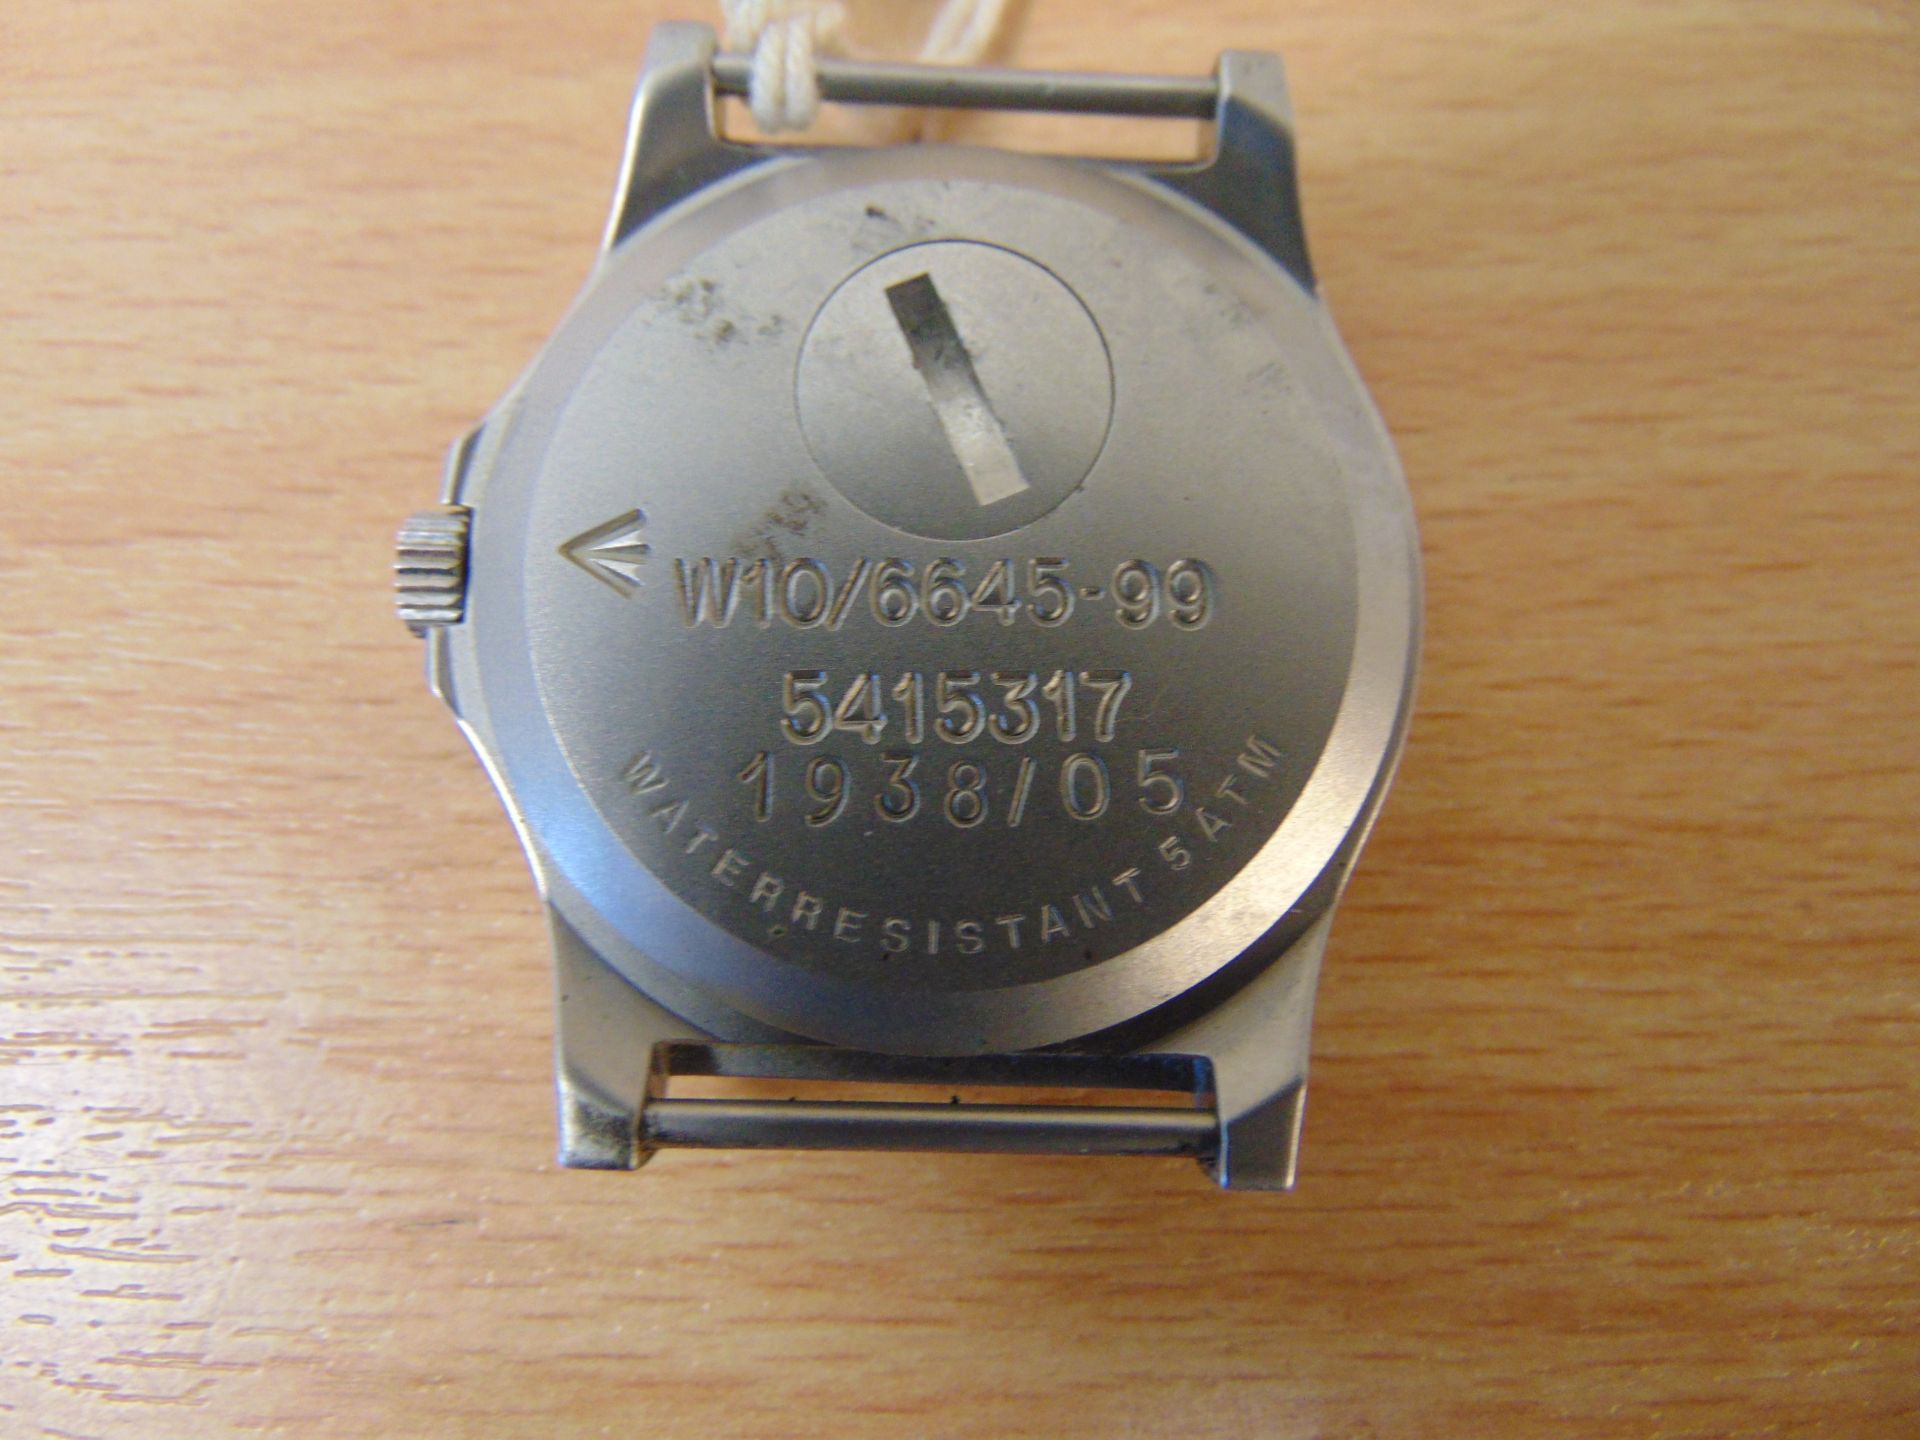 CWC W10 British Army Service Watch Nato Marks Dated 2005, Water Resistant to 5 ATM - Image 2 of 3